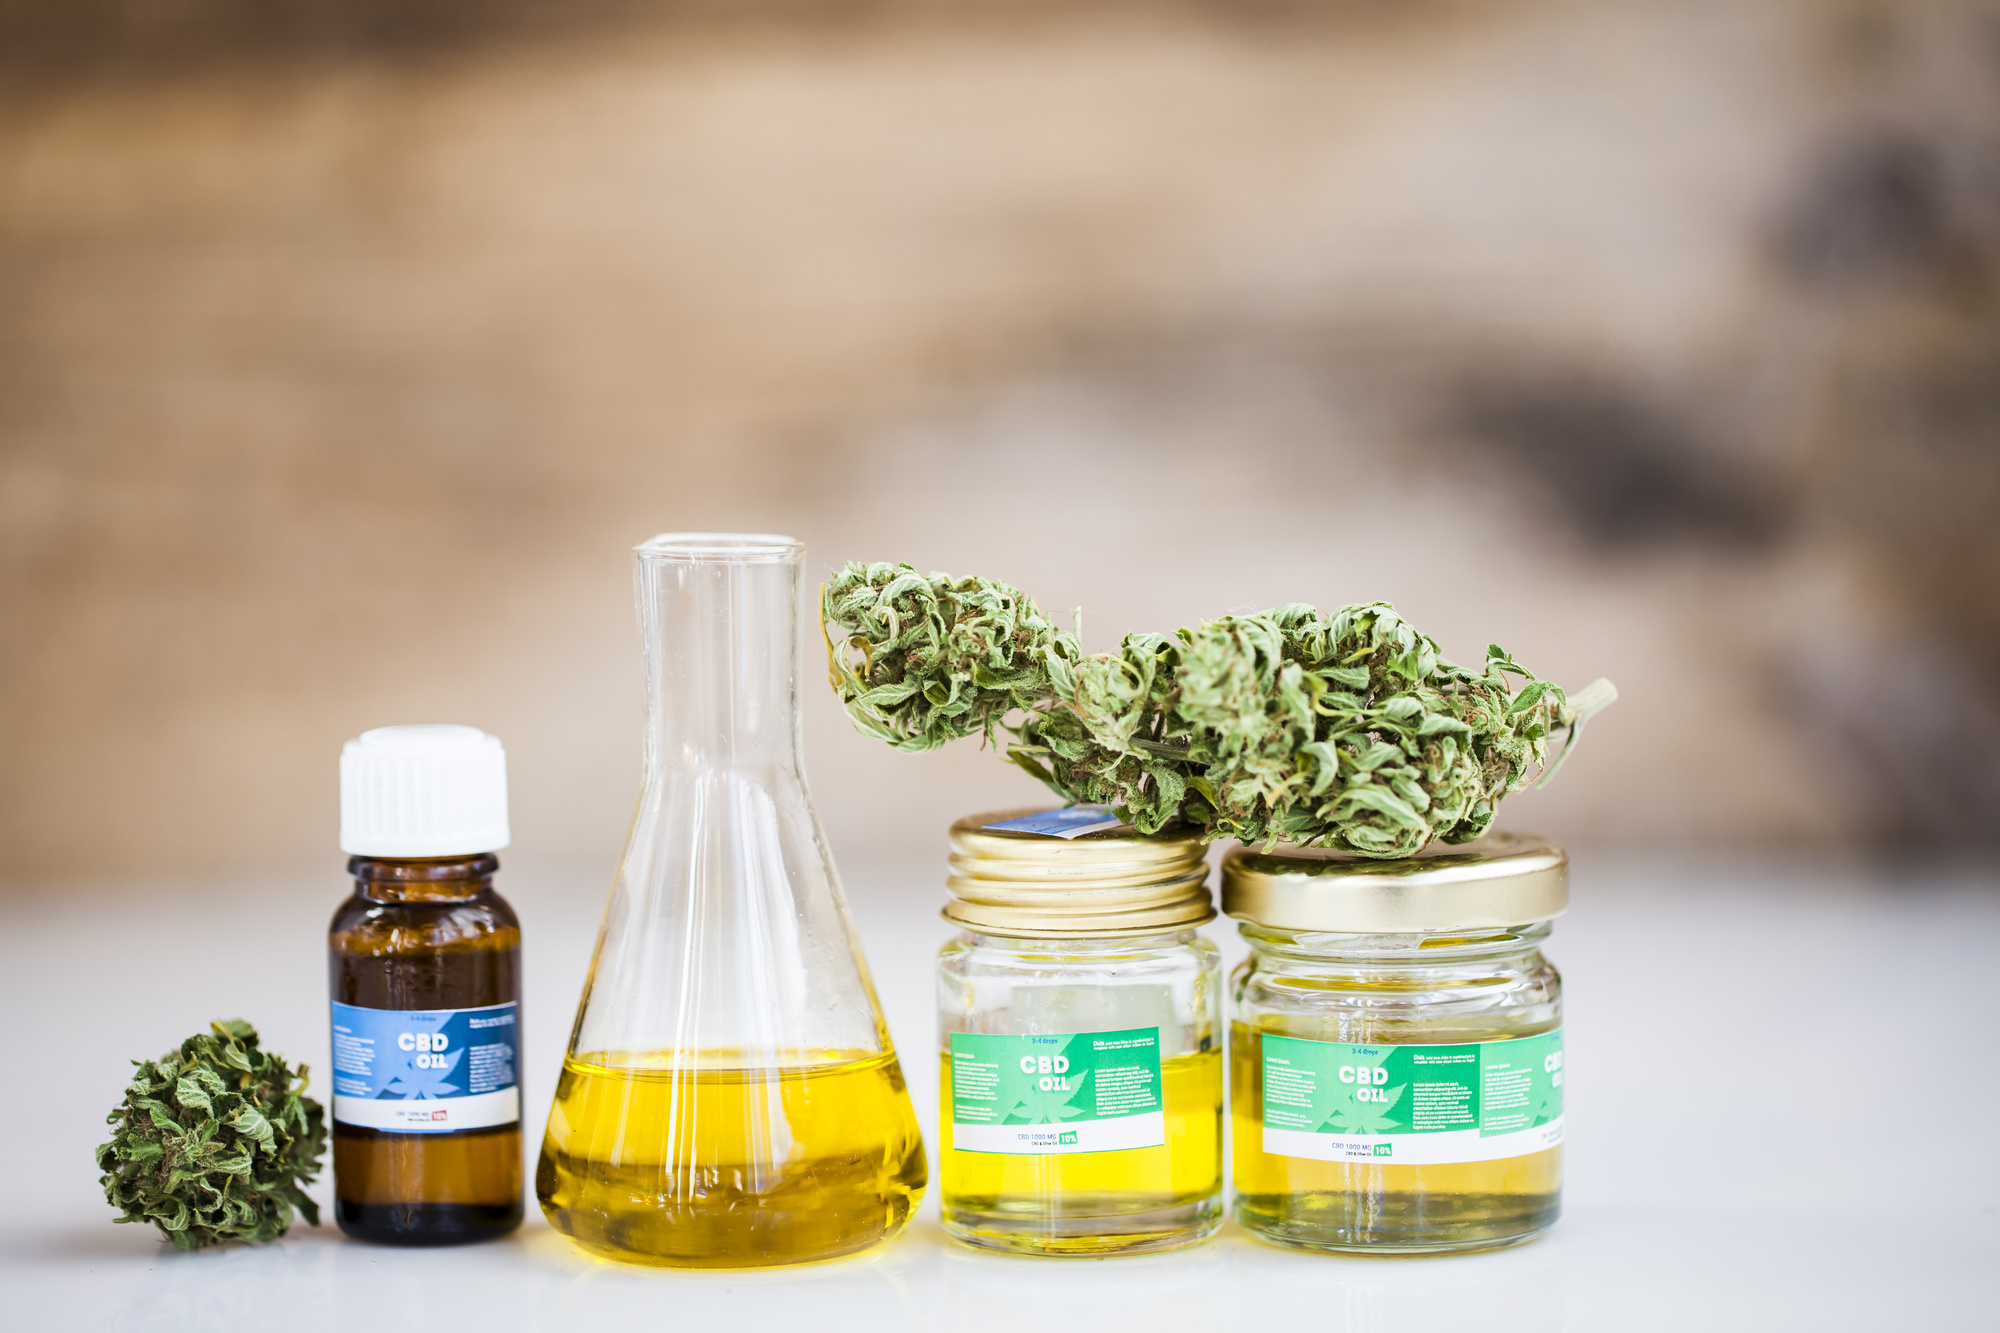 Where to buy CBD Oil in East Lindsey, UK